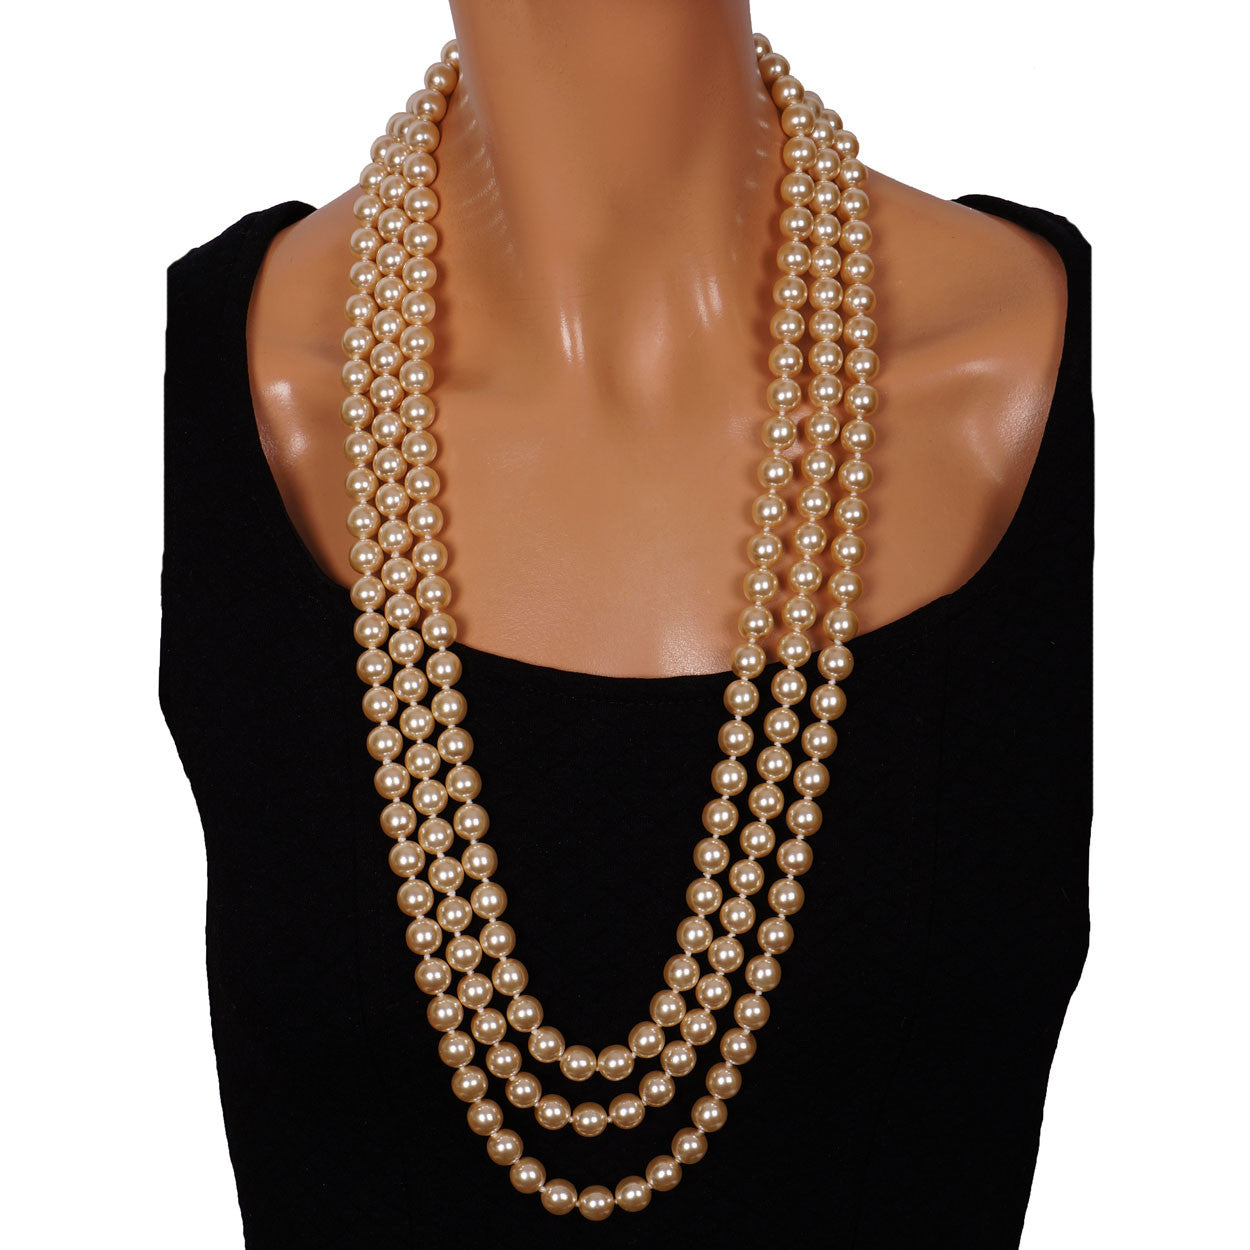 Necklace 3 Strand With Faux Pearls ⋆ The White House Noosa